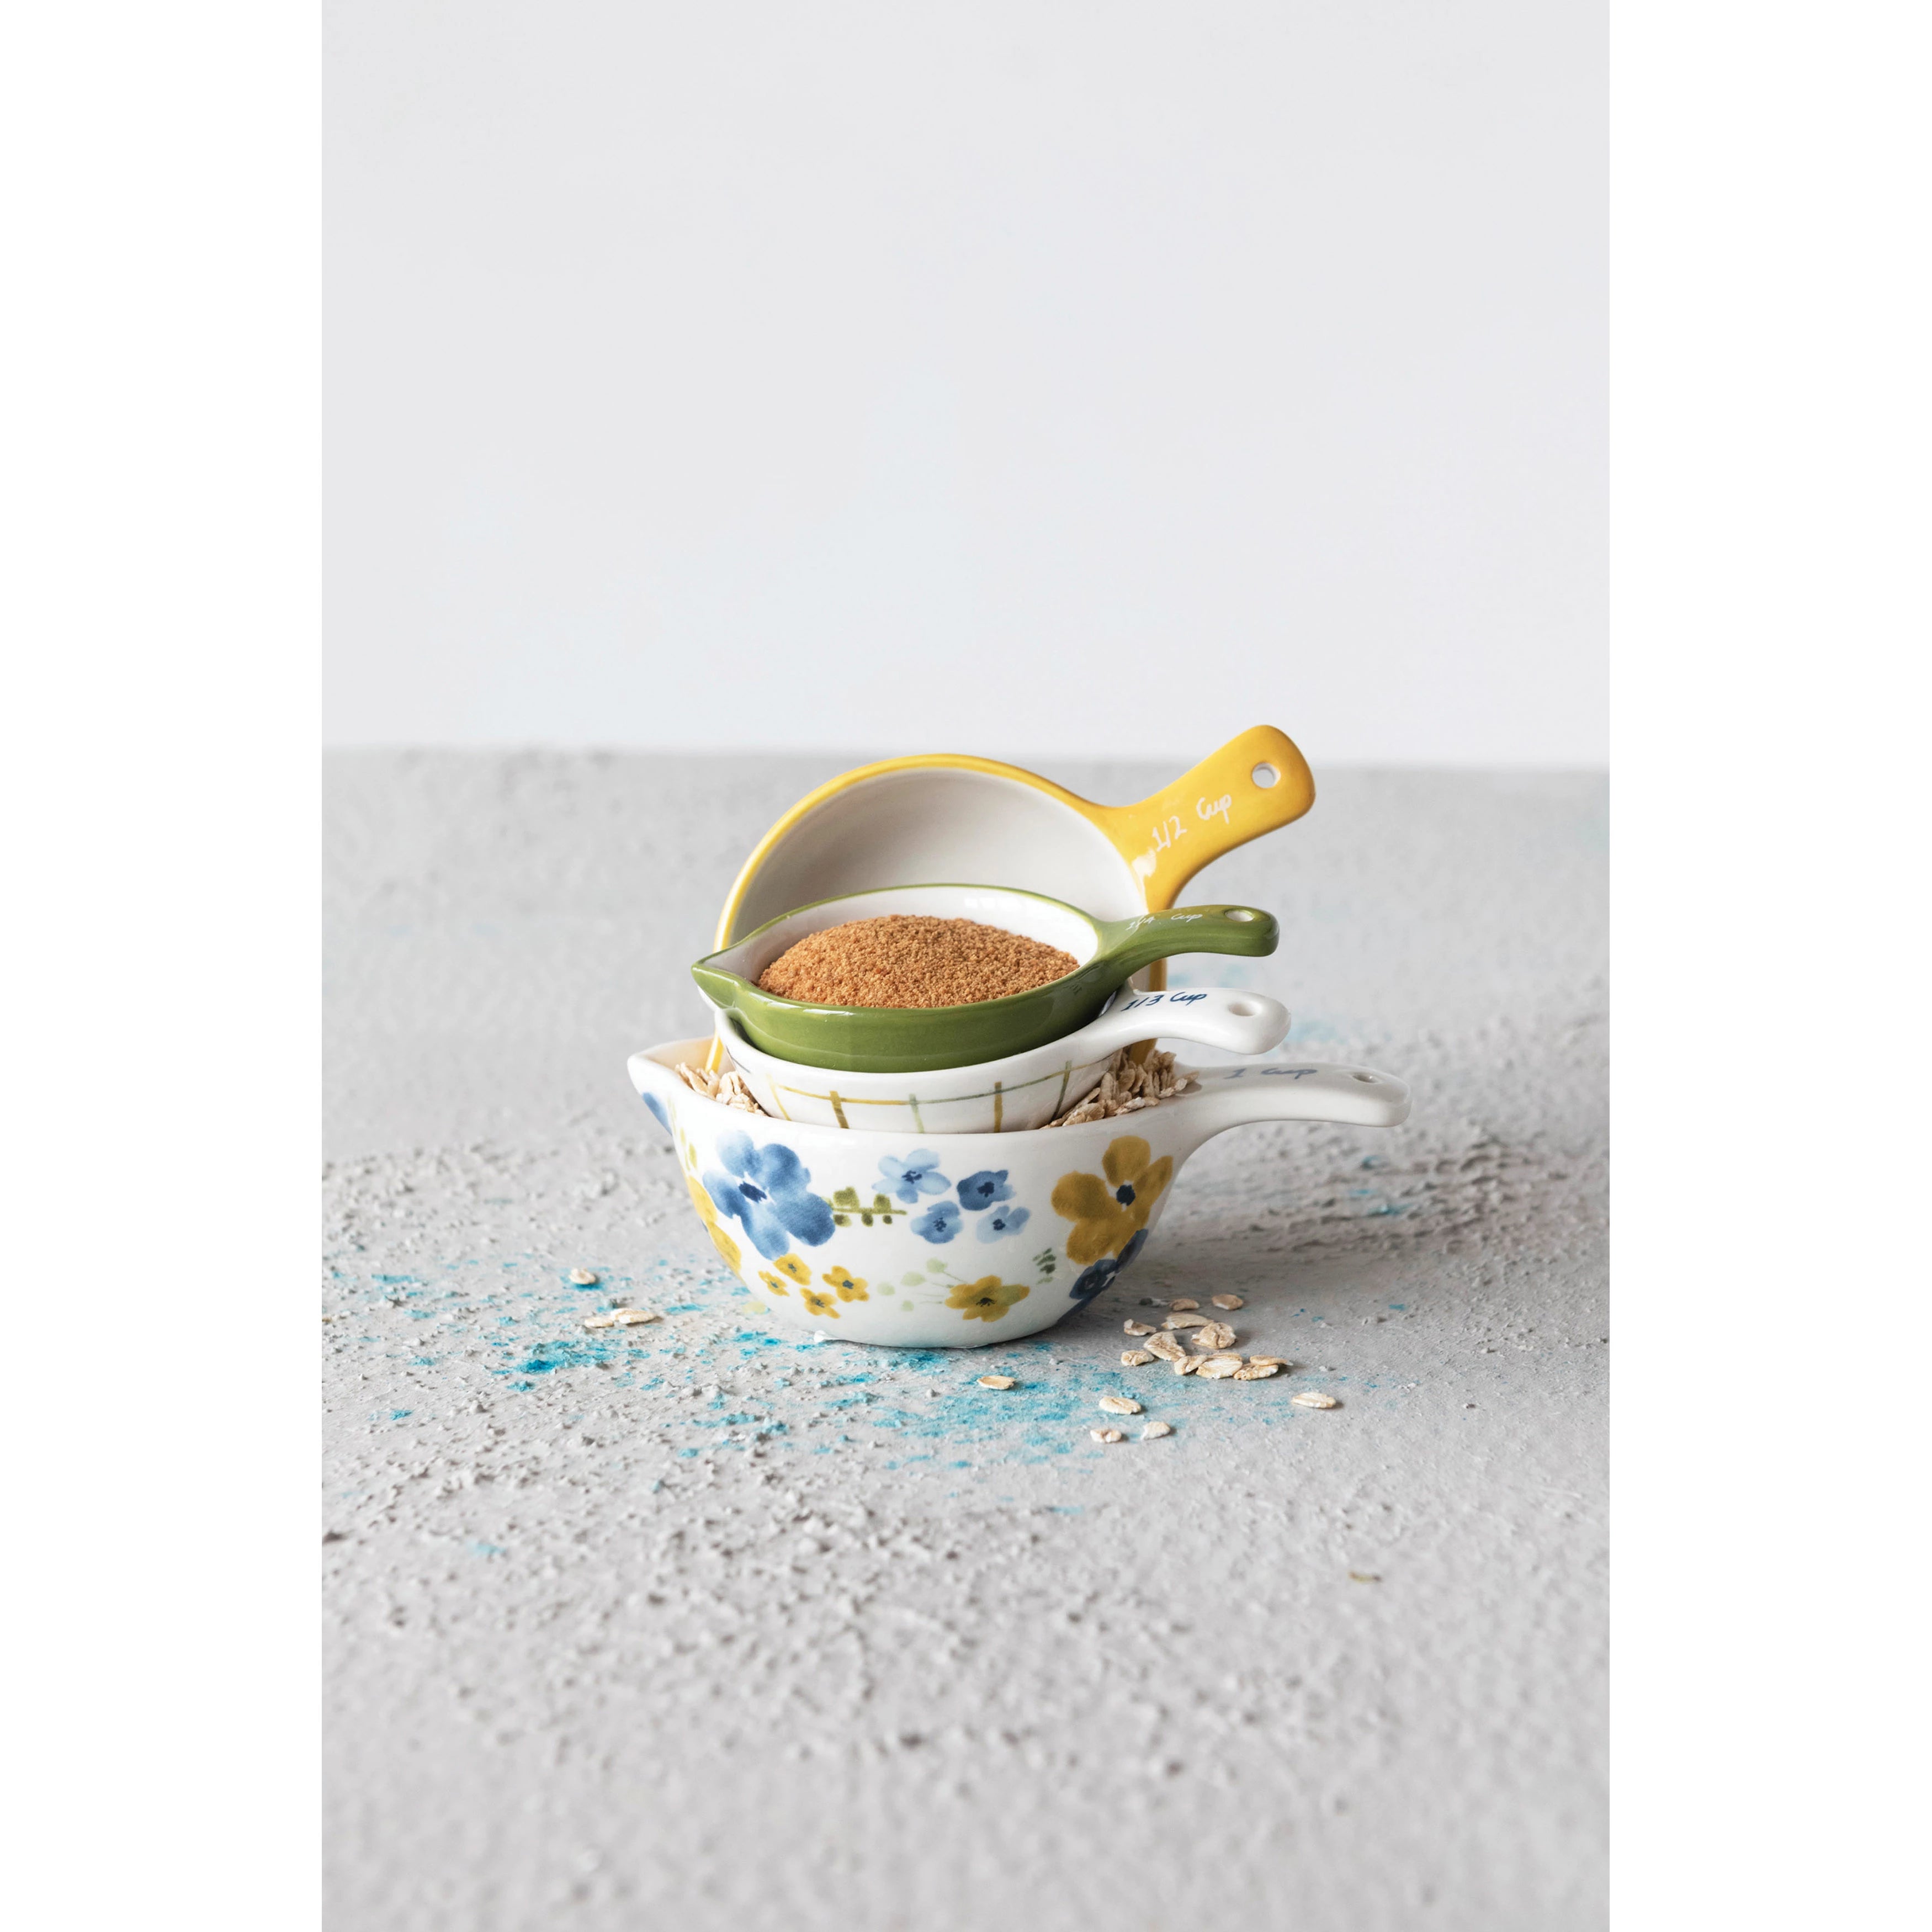 Painted Stoneware Measuring Cups, Multi Color, Set of 4 – The